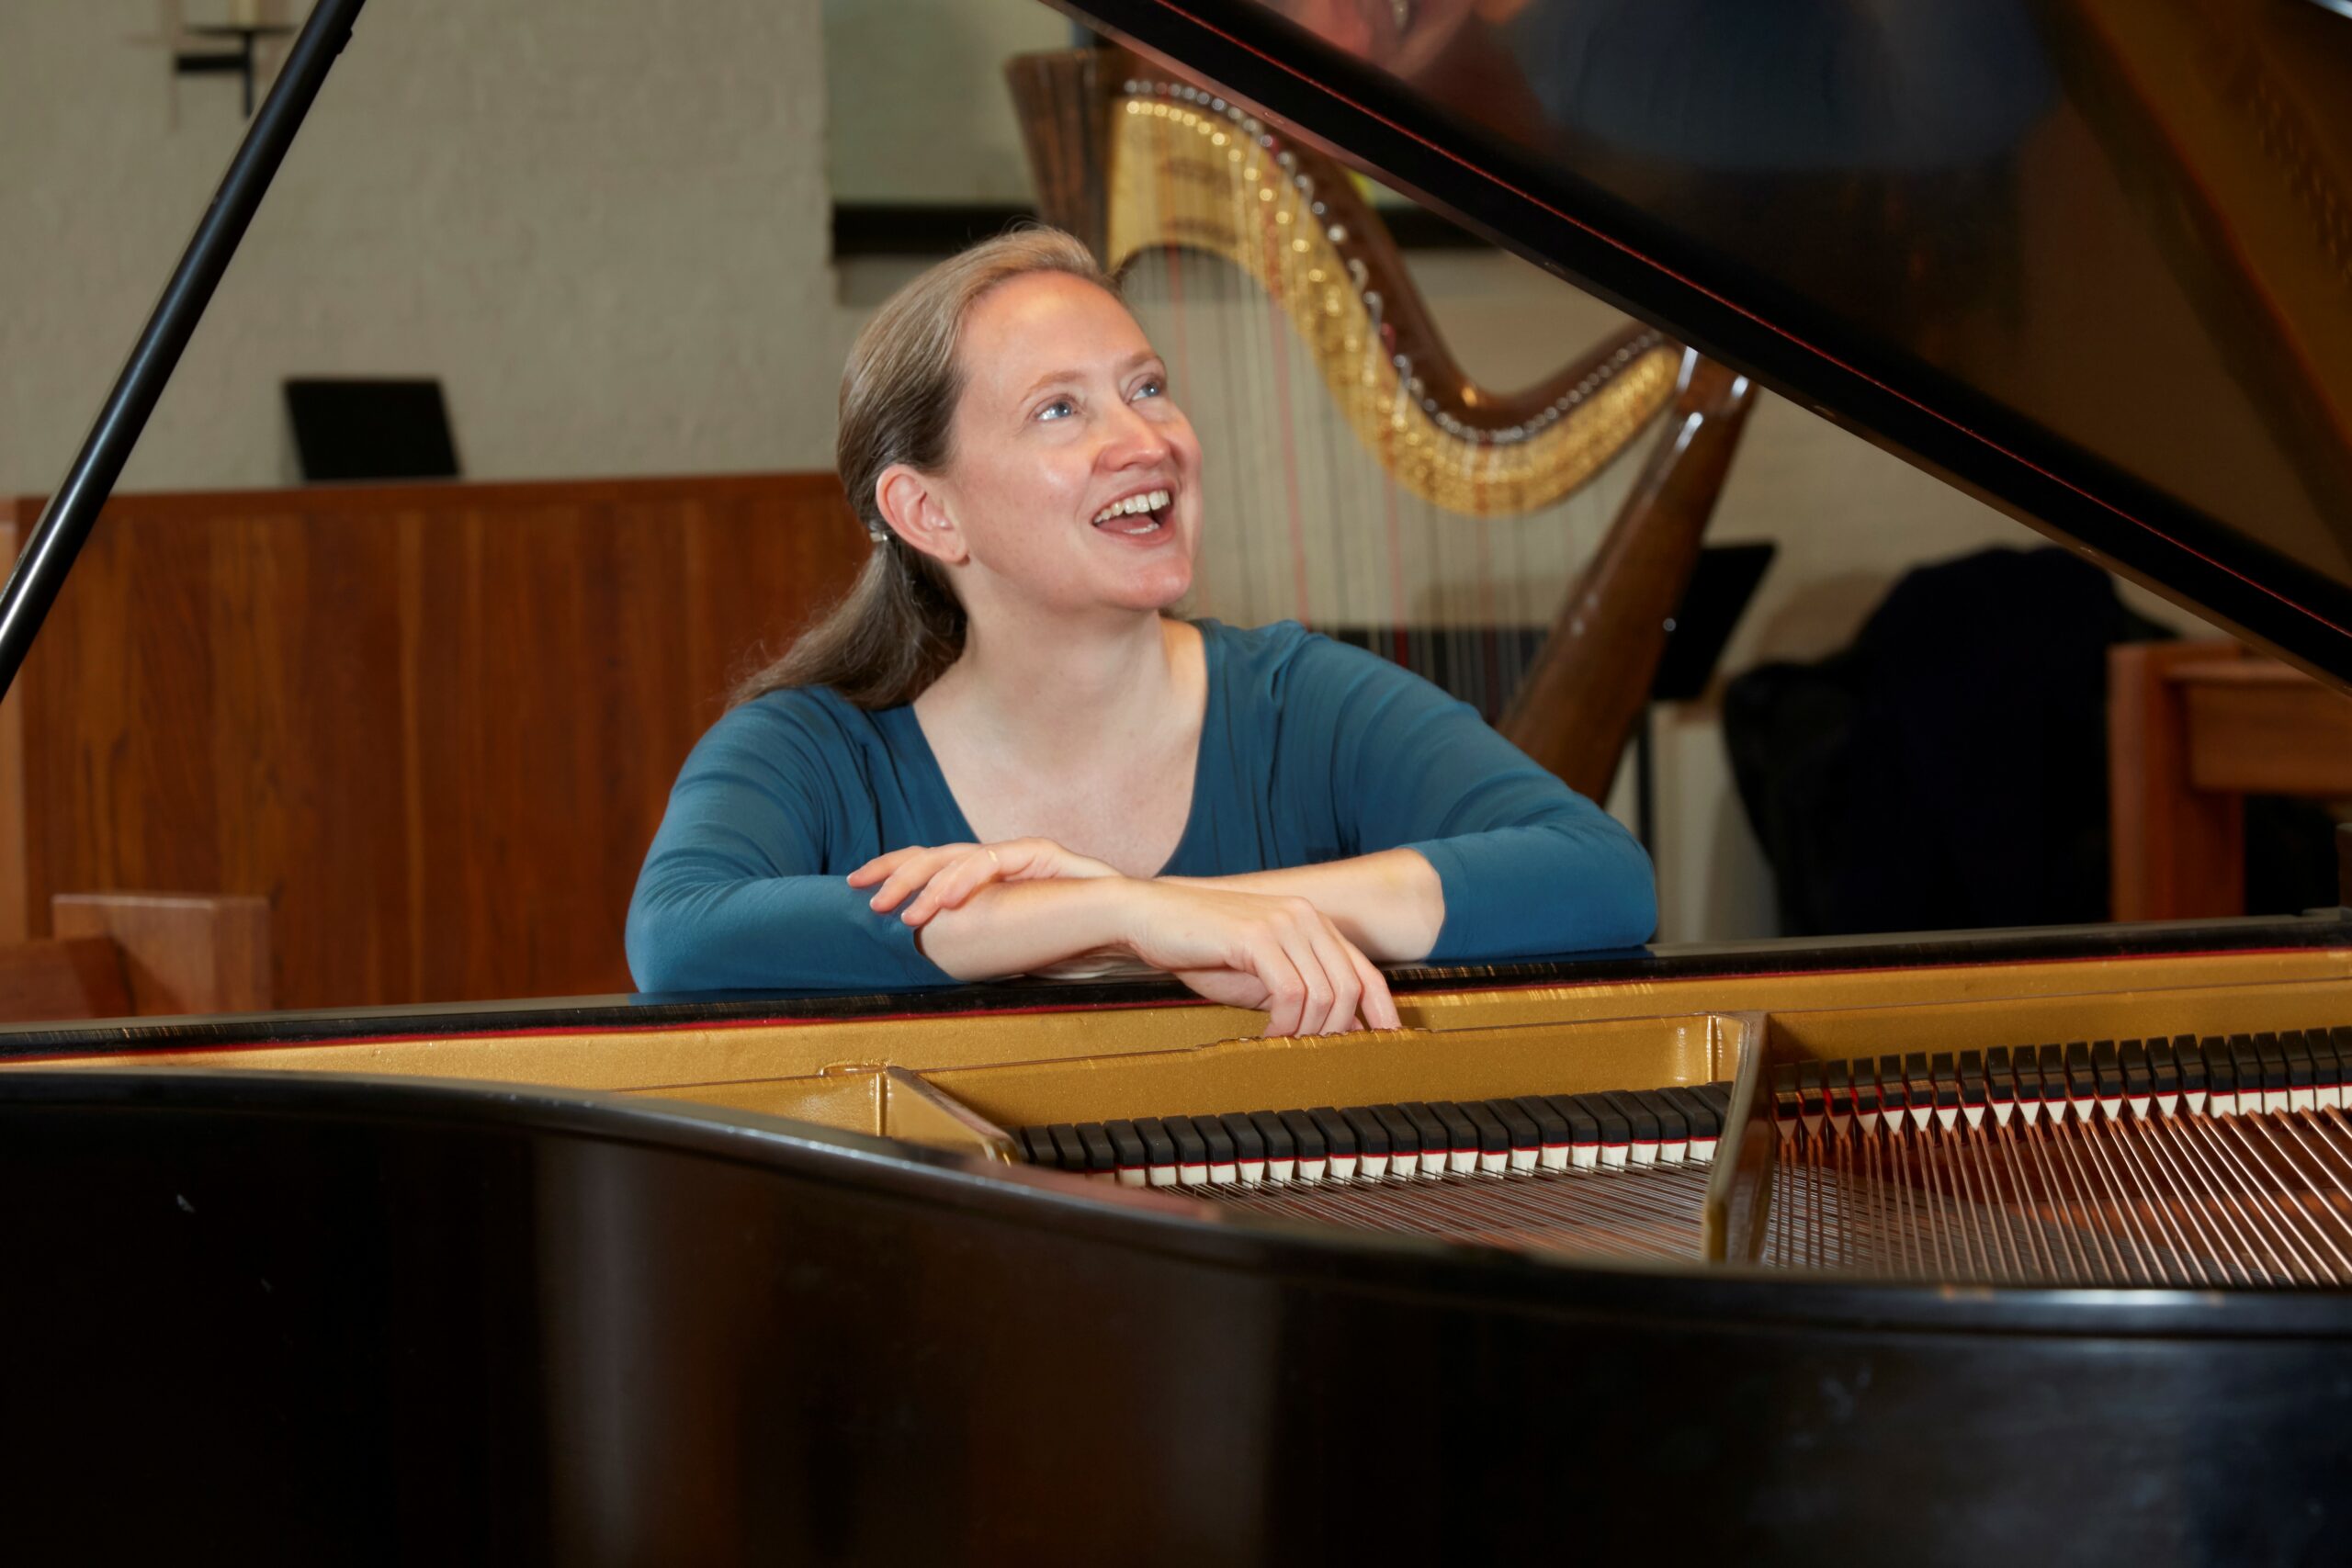 Rachel Grimes sitting in front of a grand piano with a harp in the background